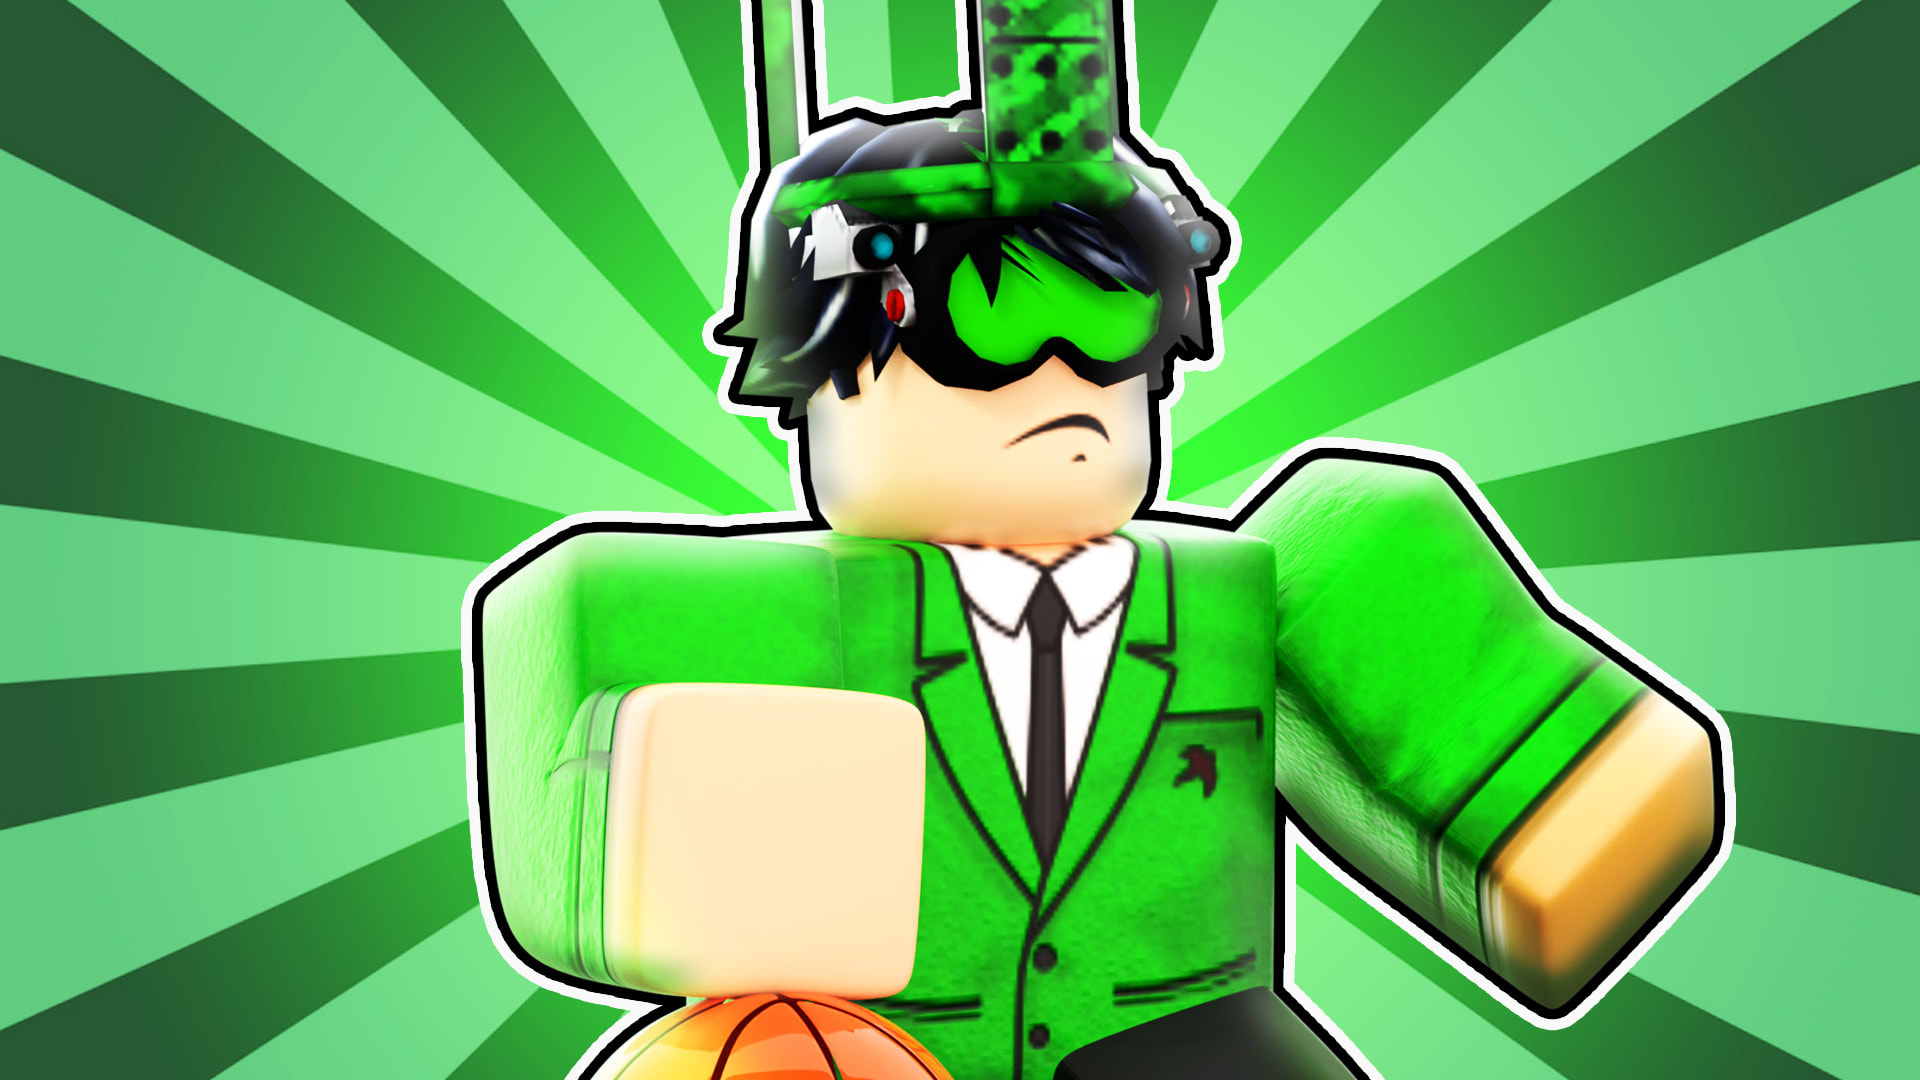 Profile - Roblox  Roblox animation, Roblox guy, Roblox pictures